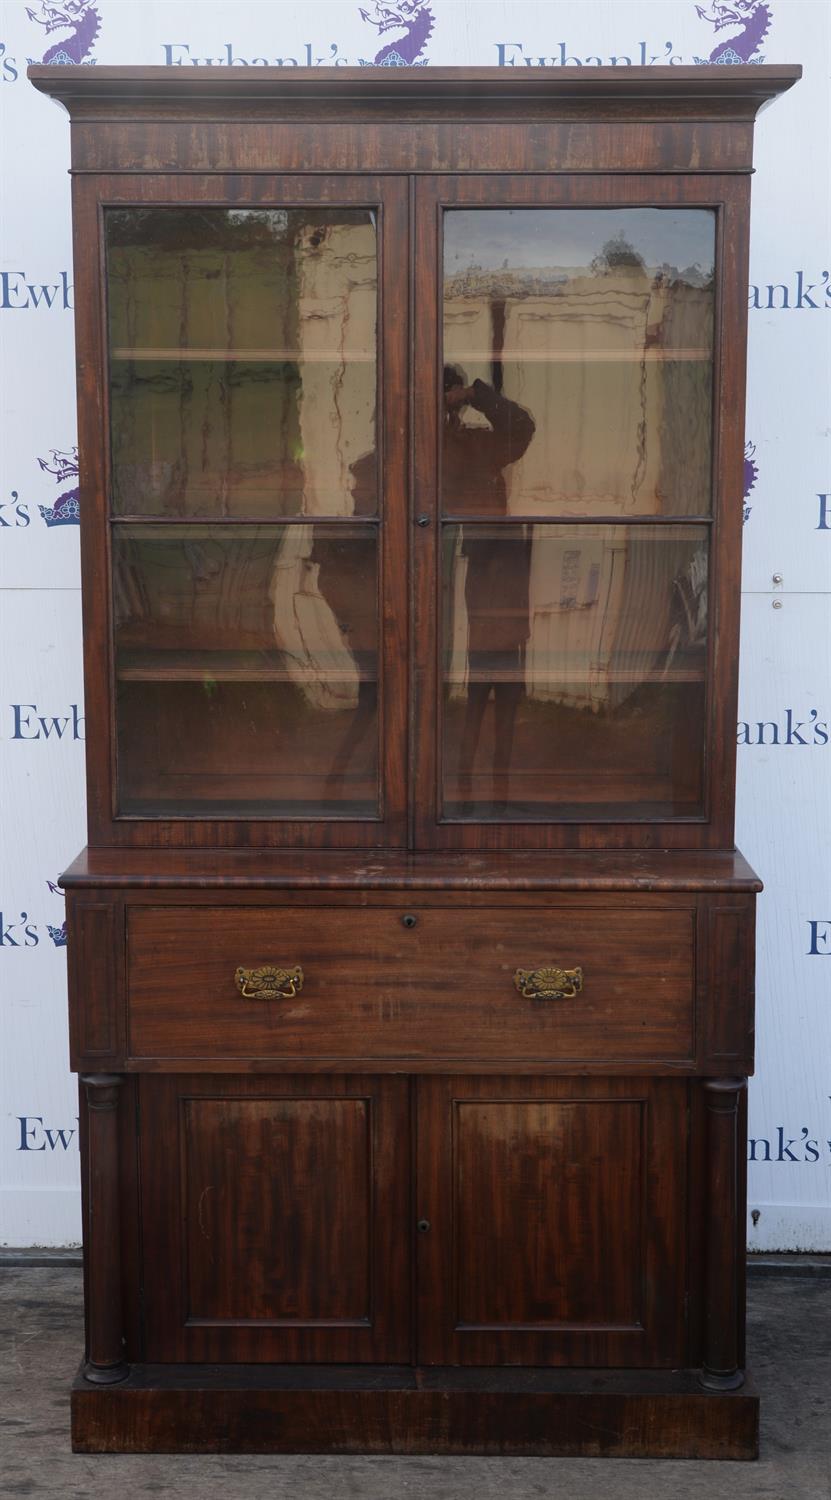 Bureau bookcase, 19th century, with glazed upper section, enclosing shelves, secretaire drawer with